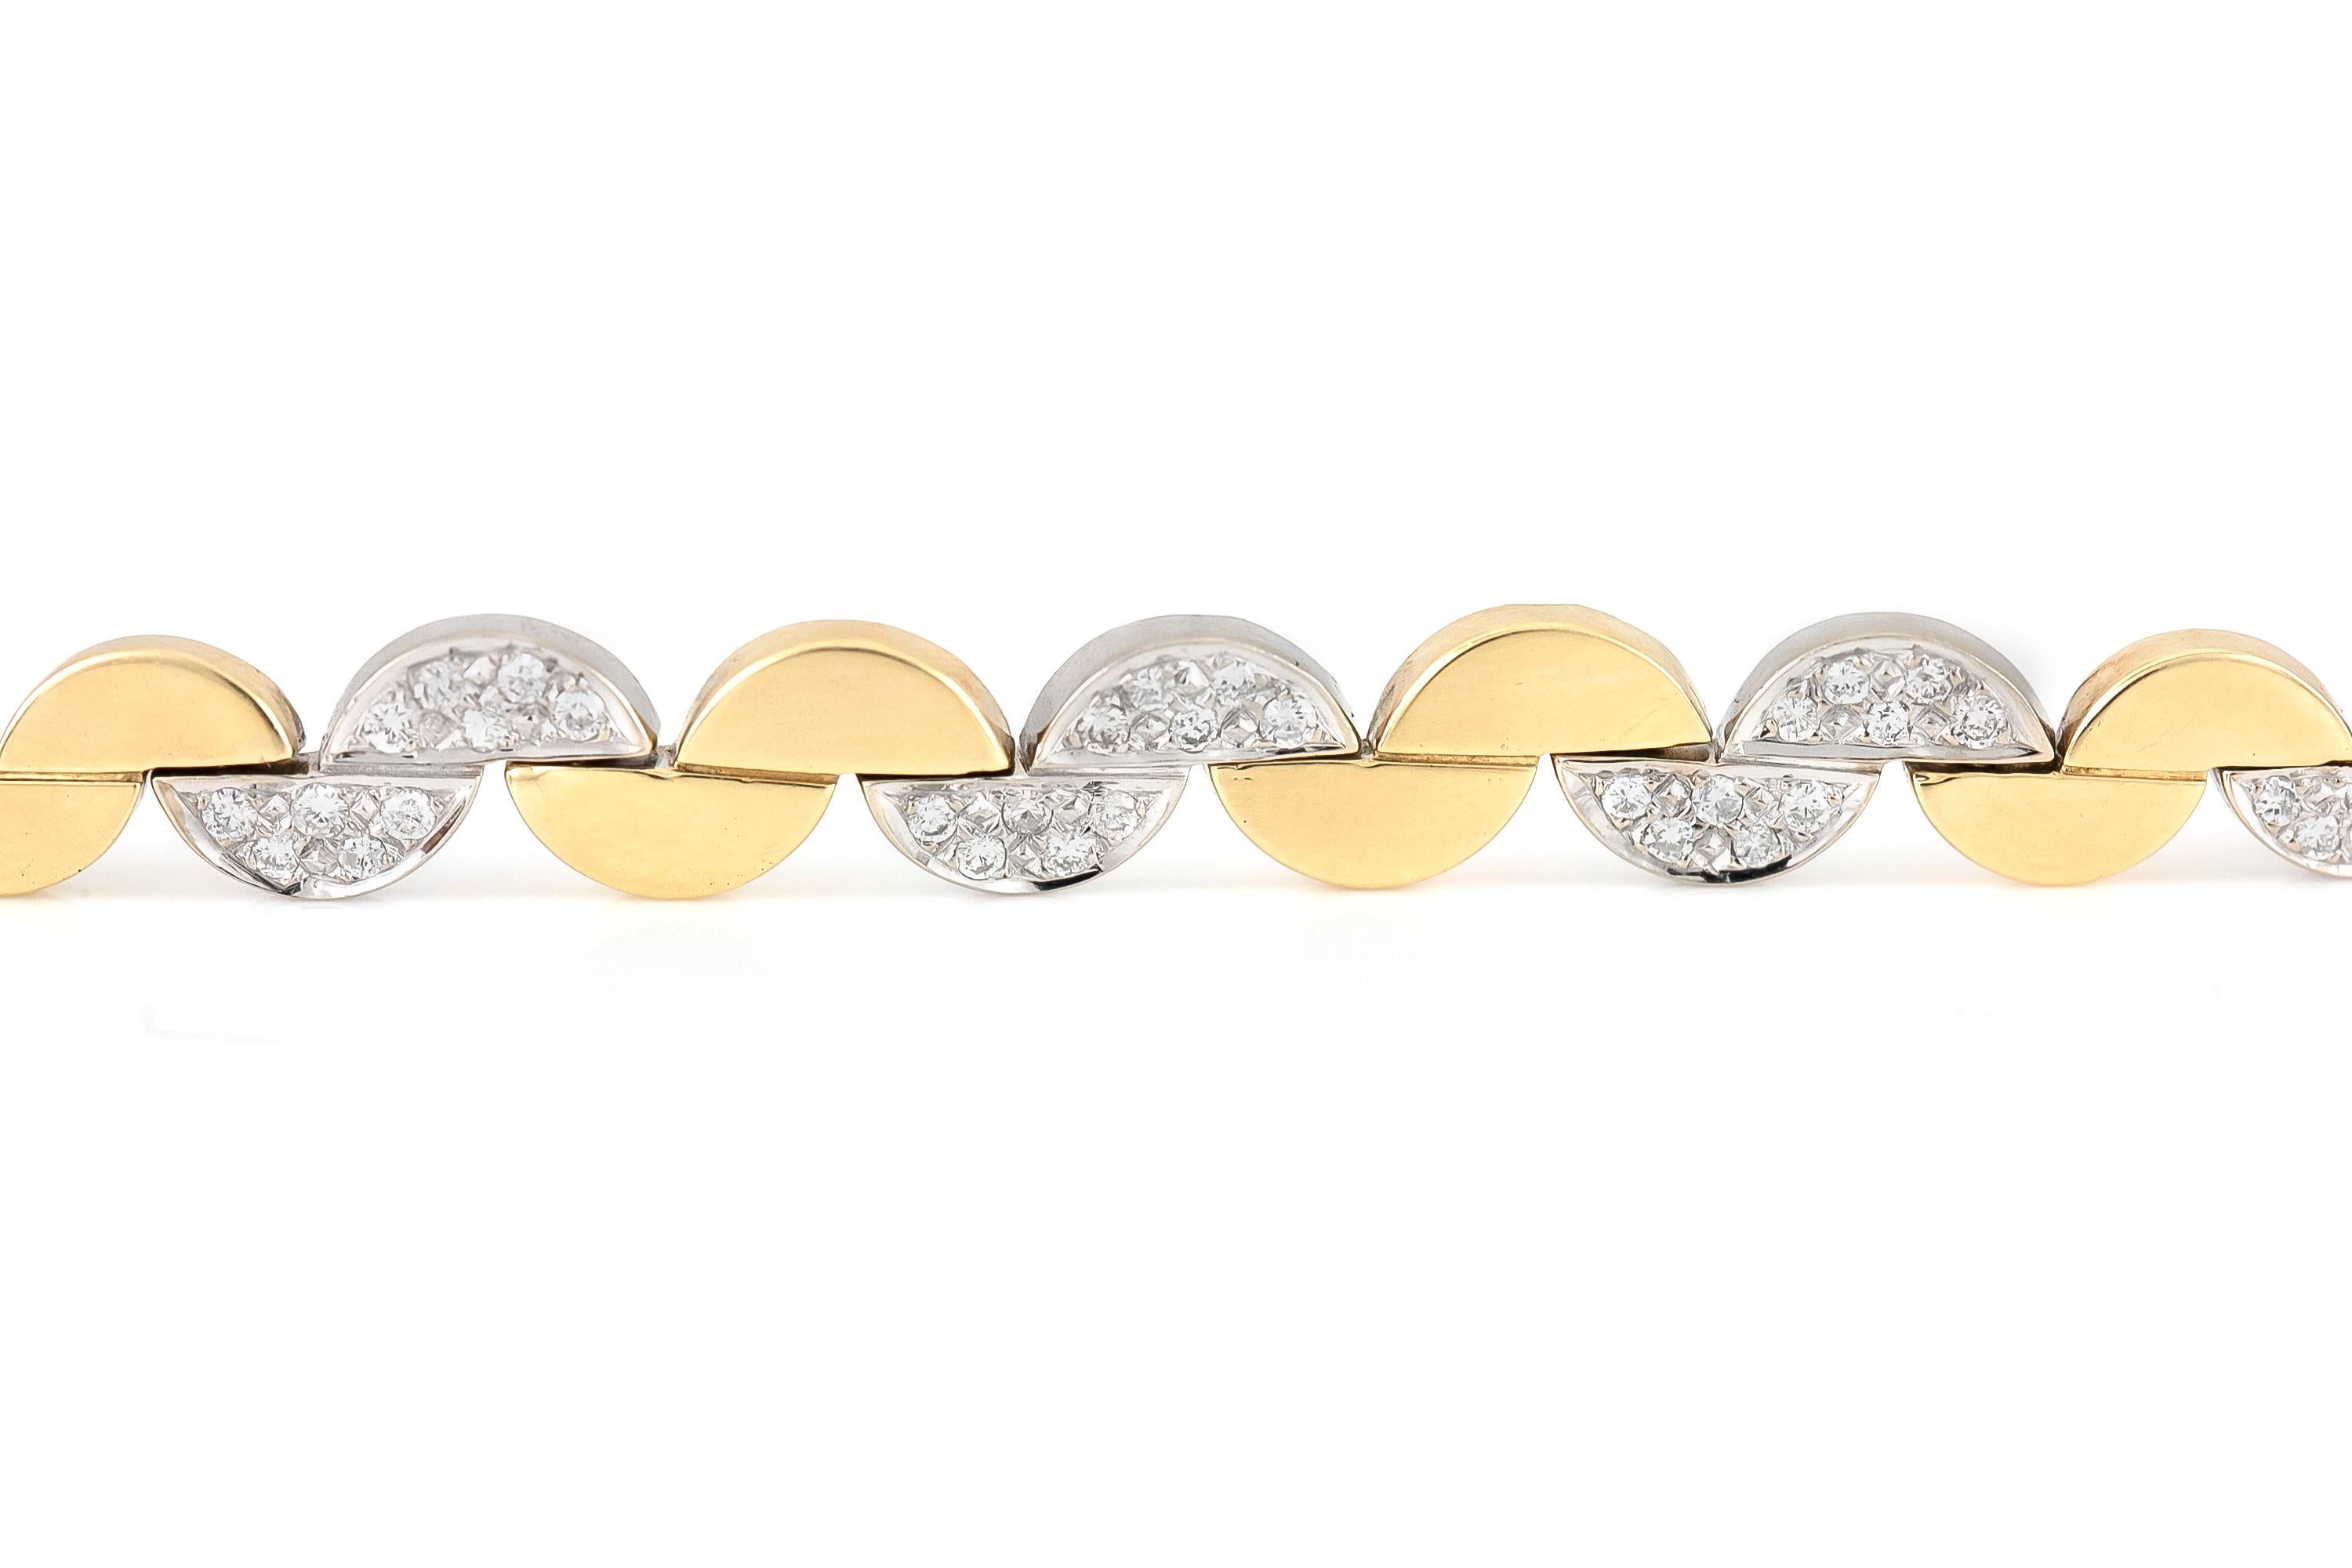 The bracelet is finely crafted in 14k yellow gold with diamonds weighing approximately total of 2.90 carat.
Circa 1980.